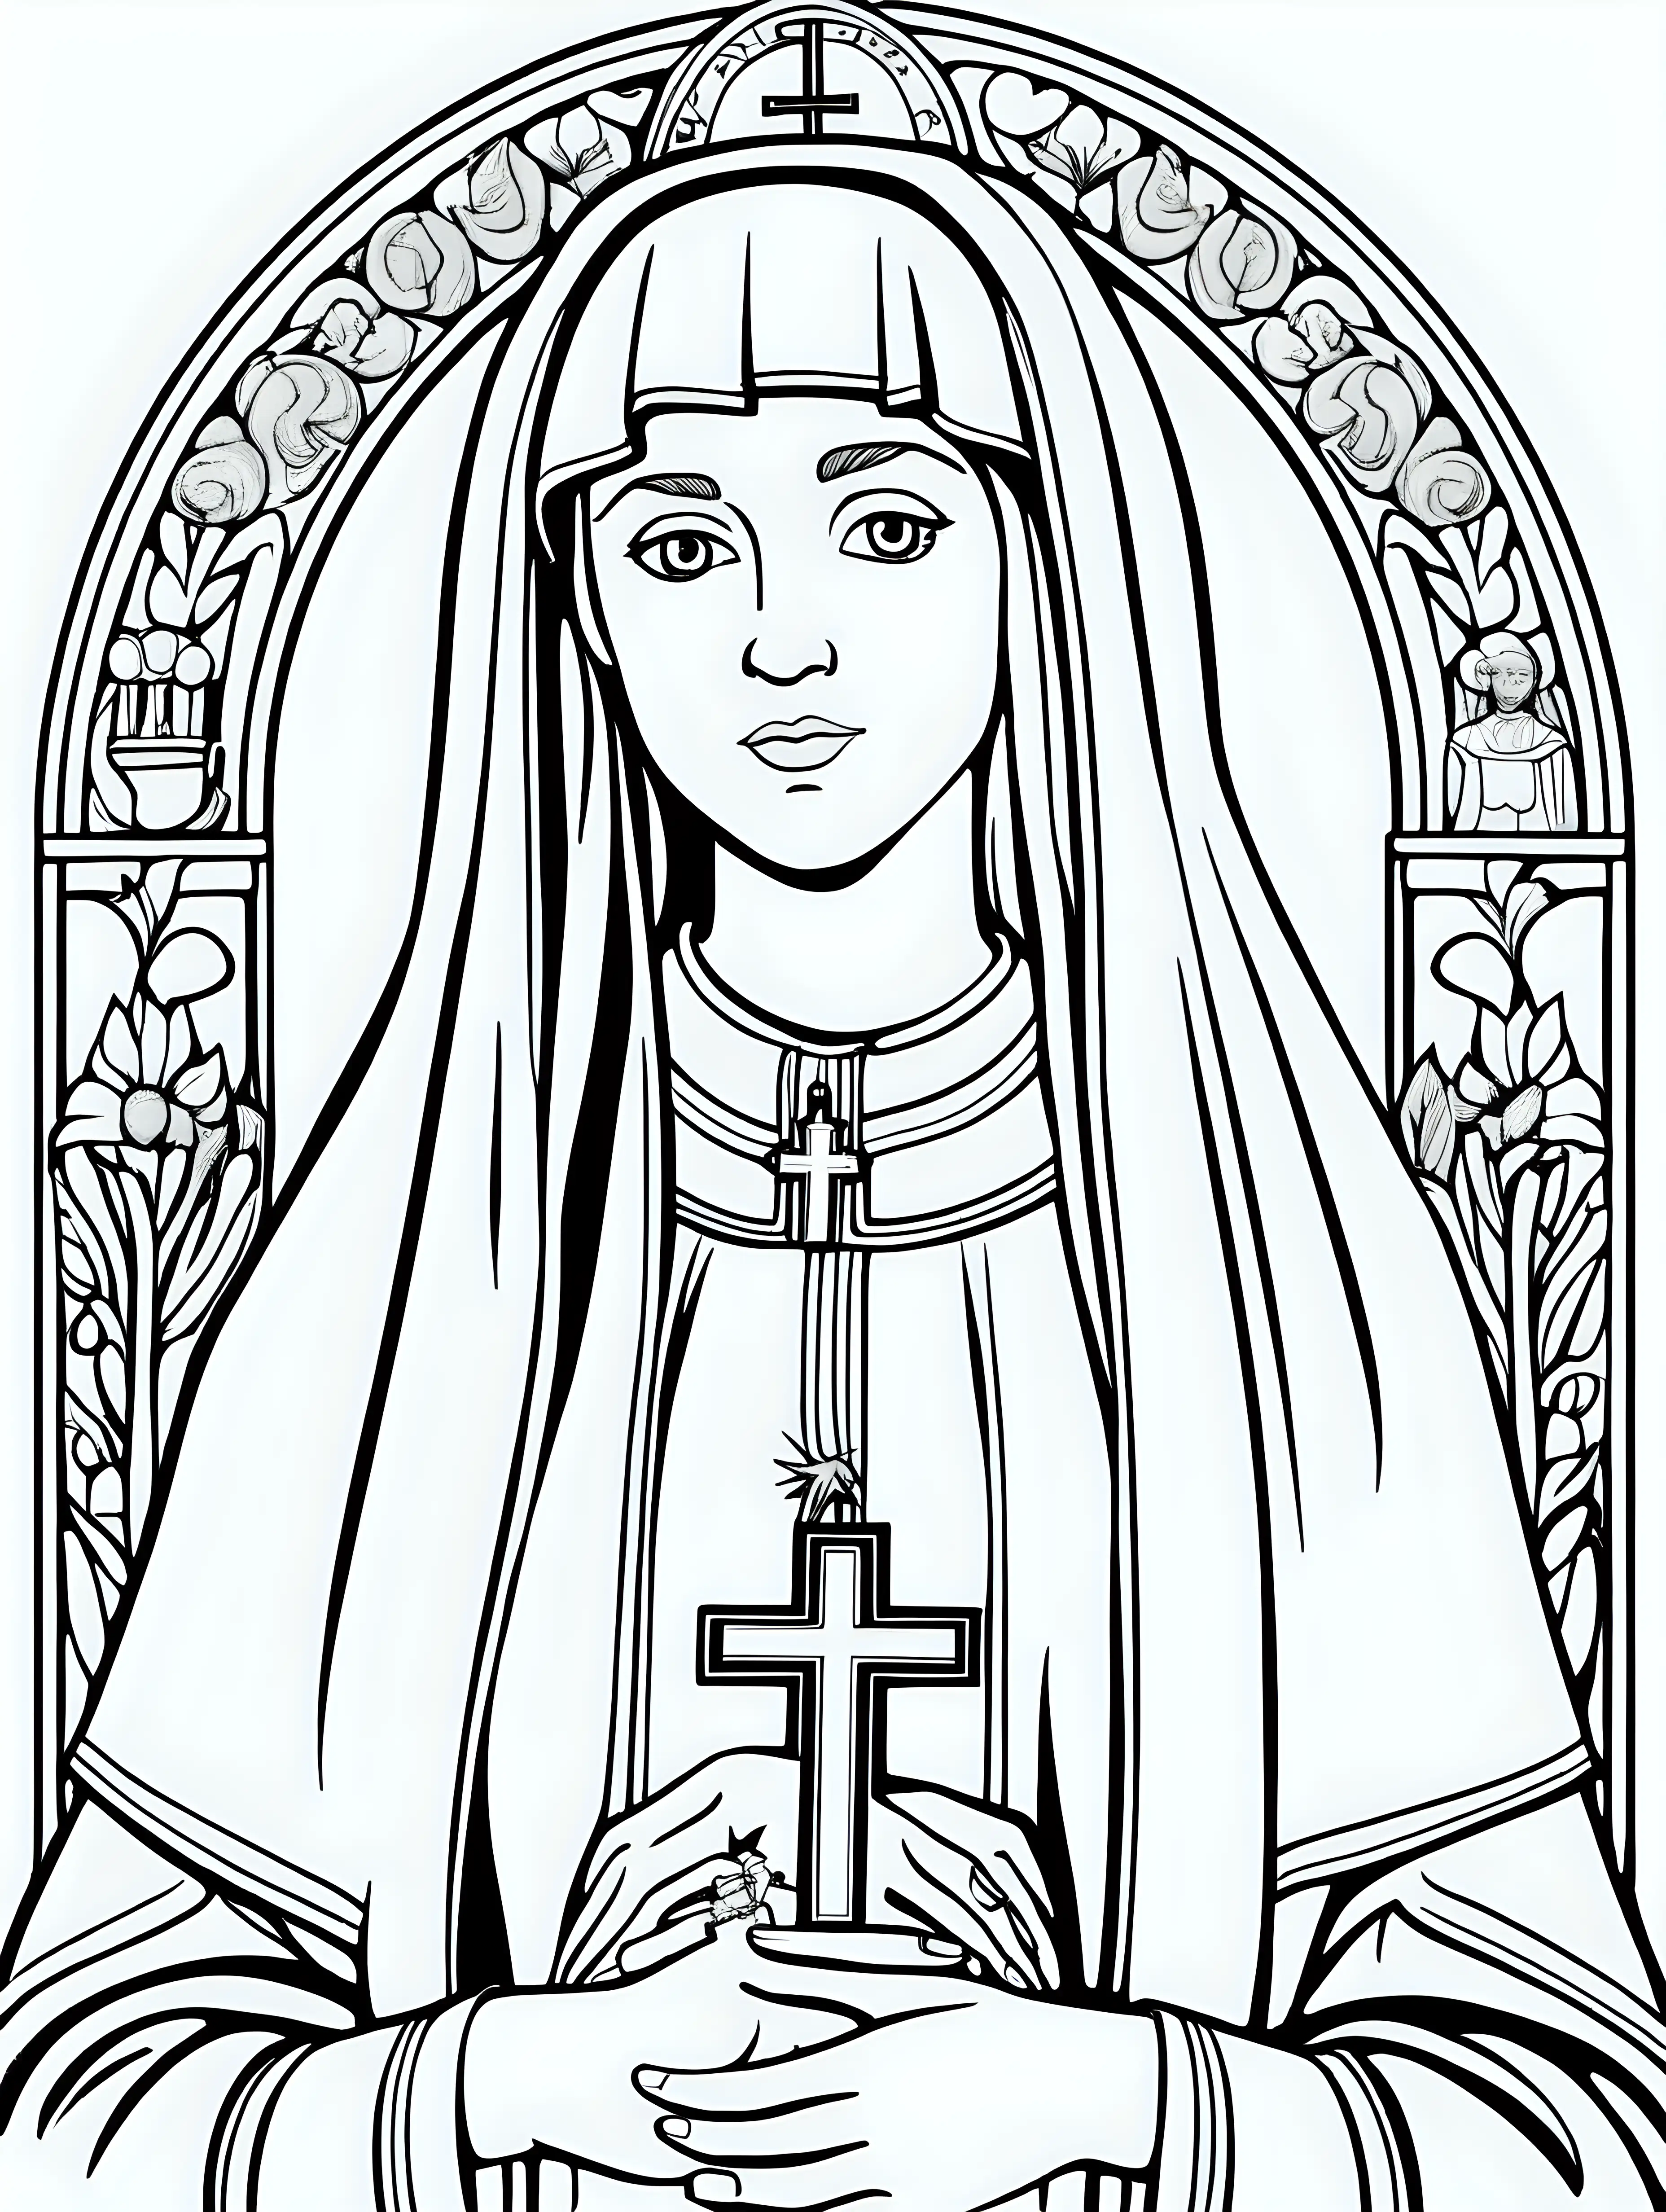 Catholic Woman Coloring Page in Cartoon Style with Minimal Details